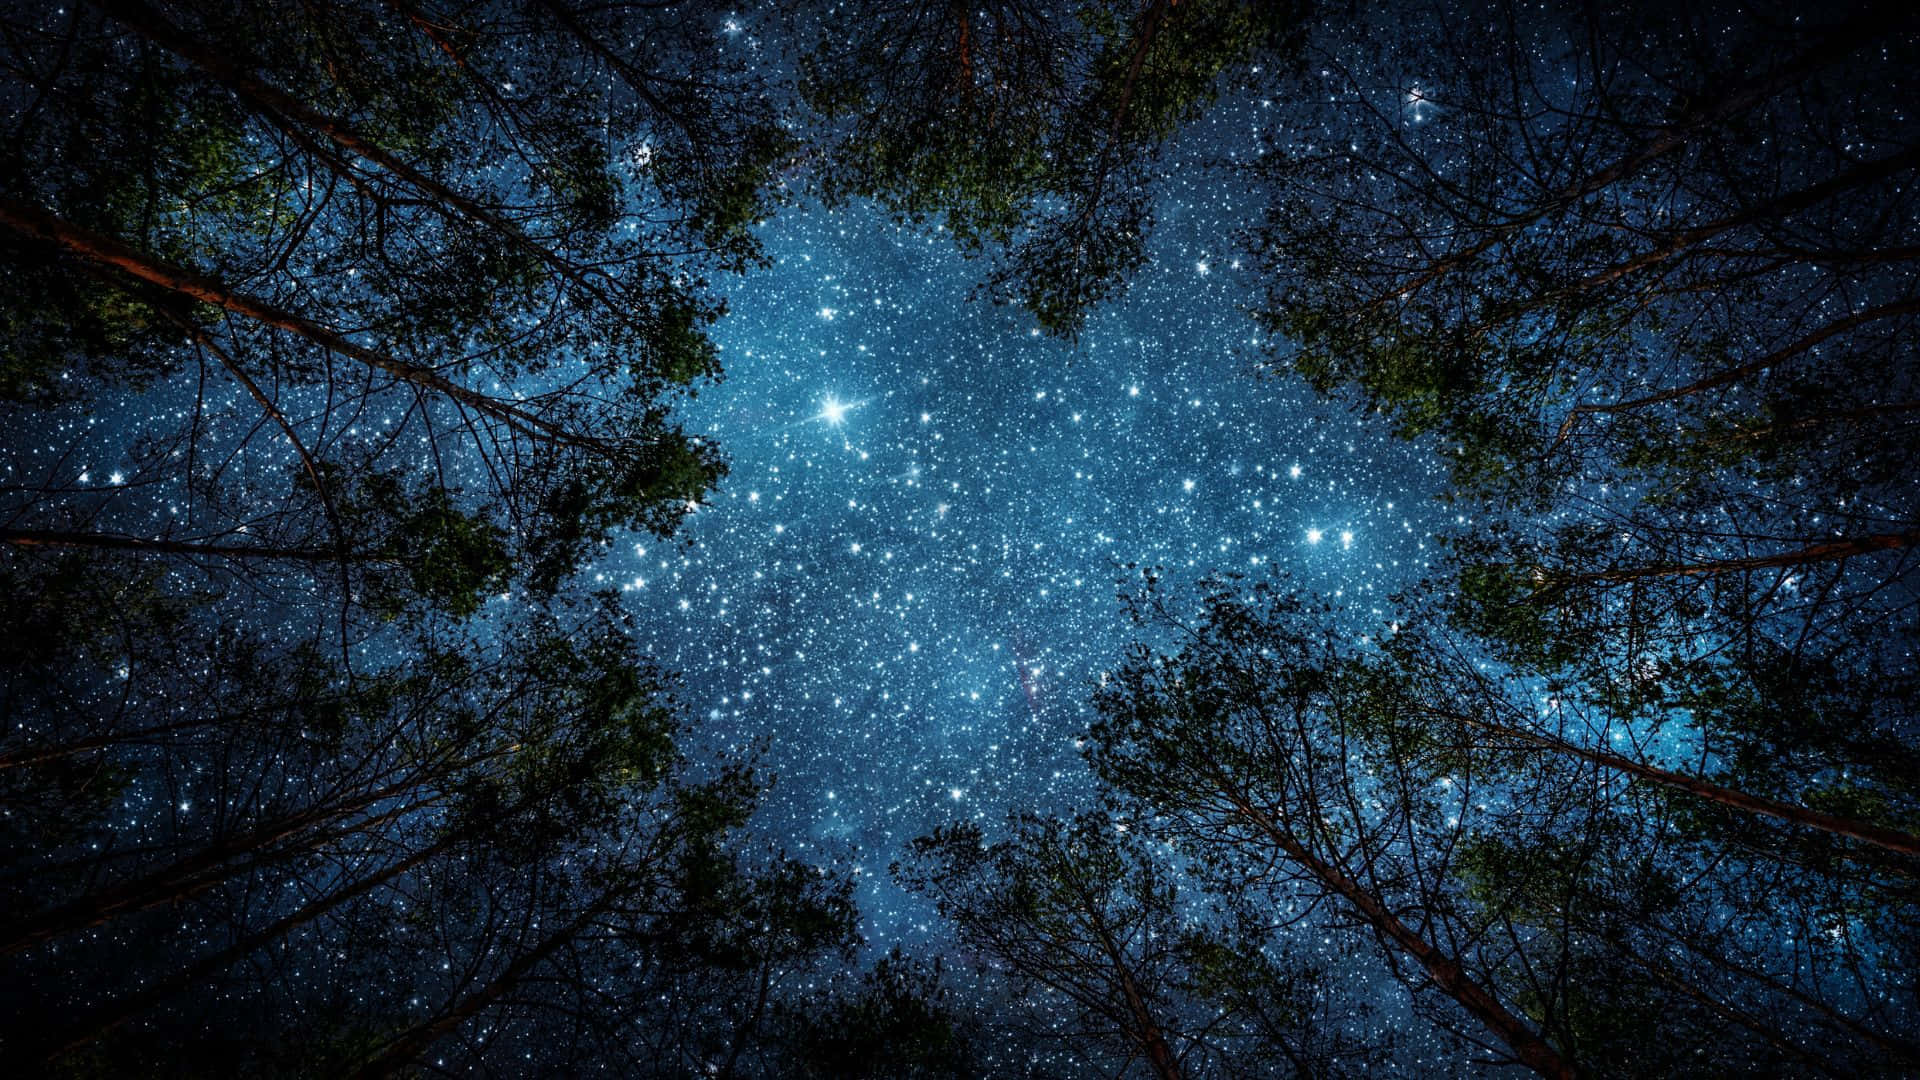 Be inspired by the beauty of The Starry Night